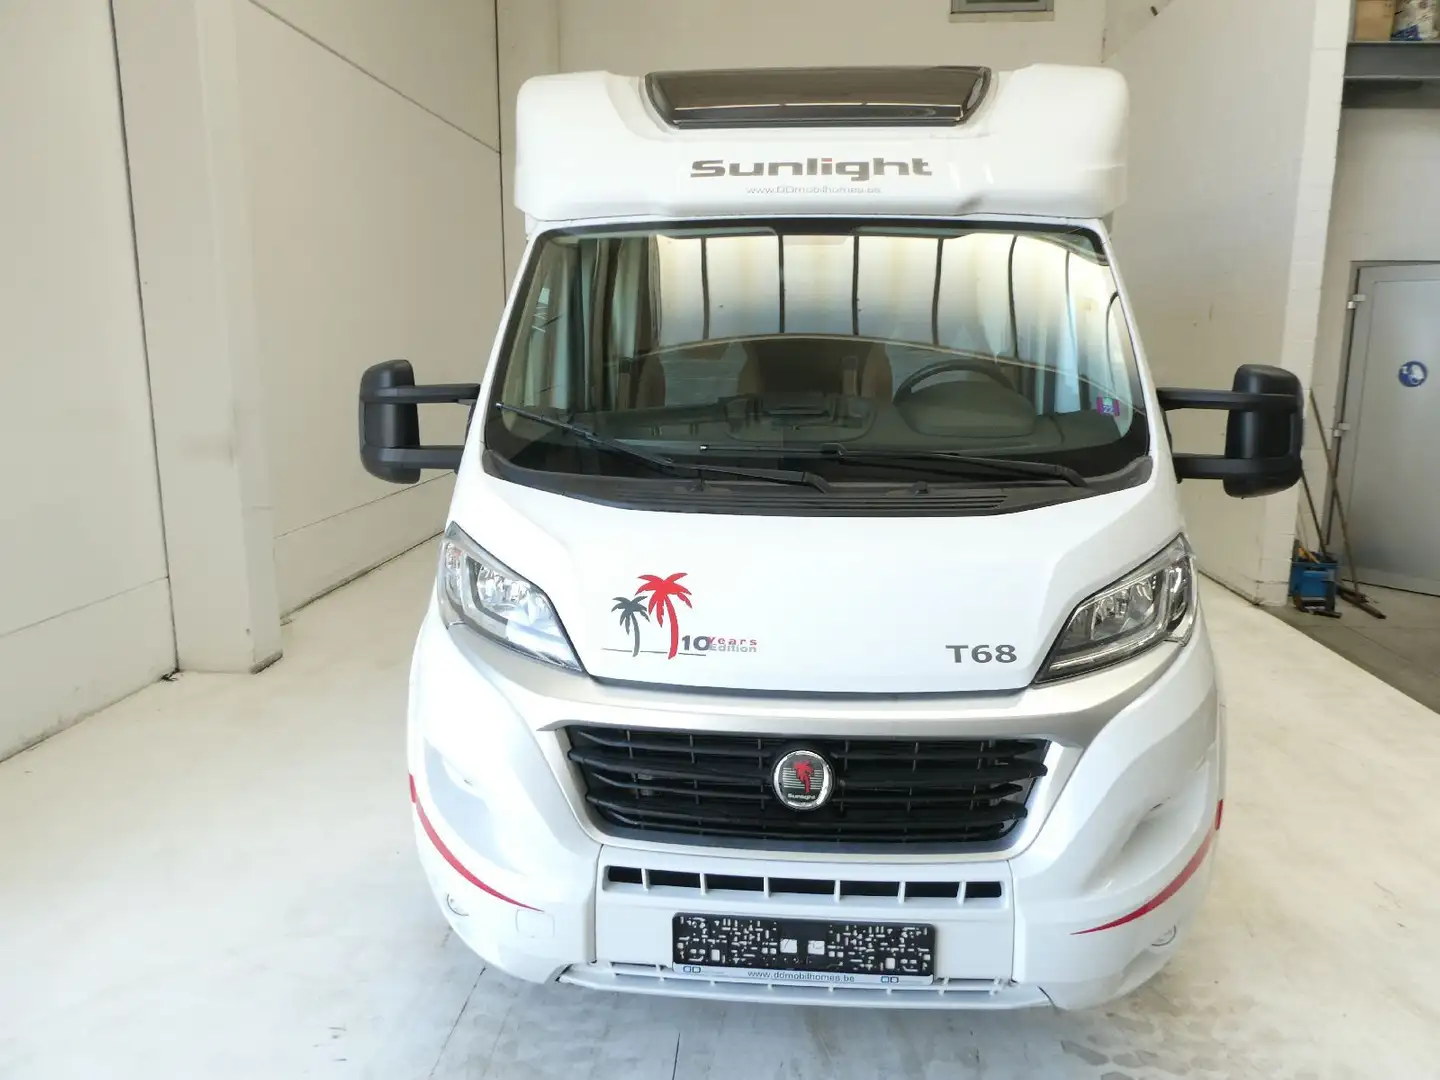 Fiat Ducato 10 Years Edition 2.3 D Sunlight T68 Wit - 1